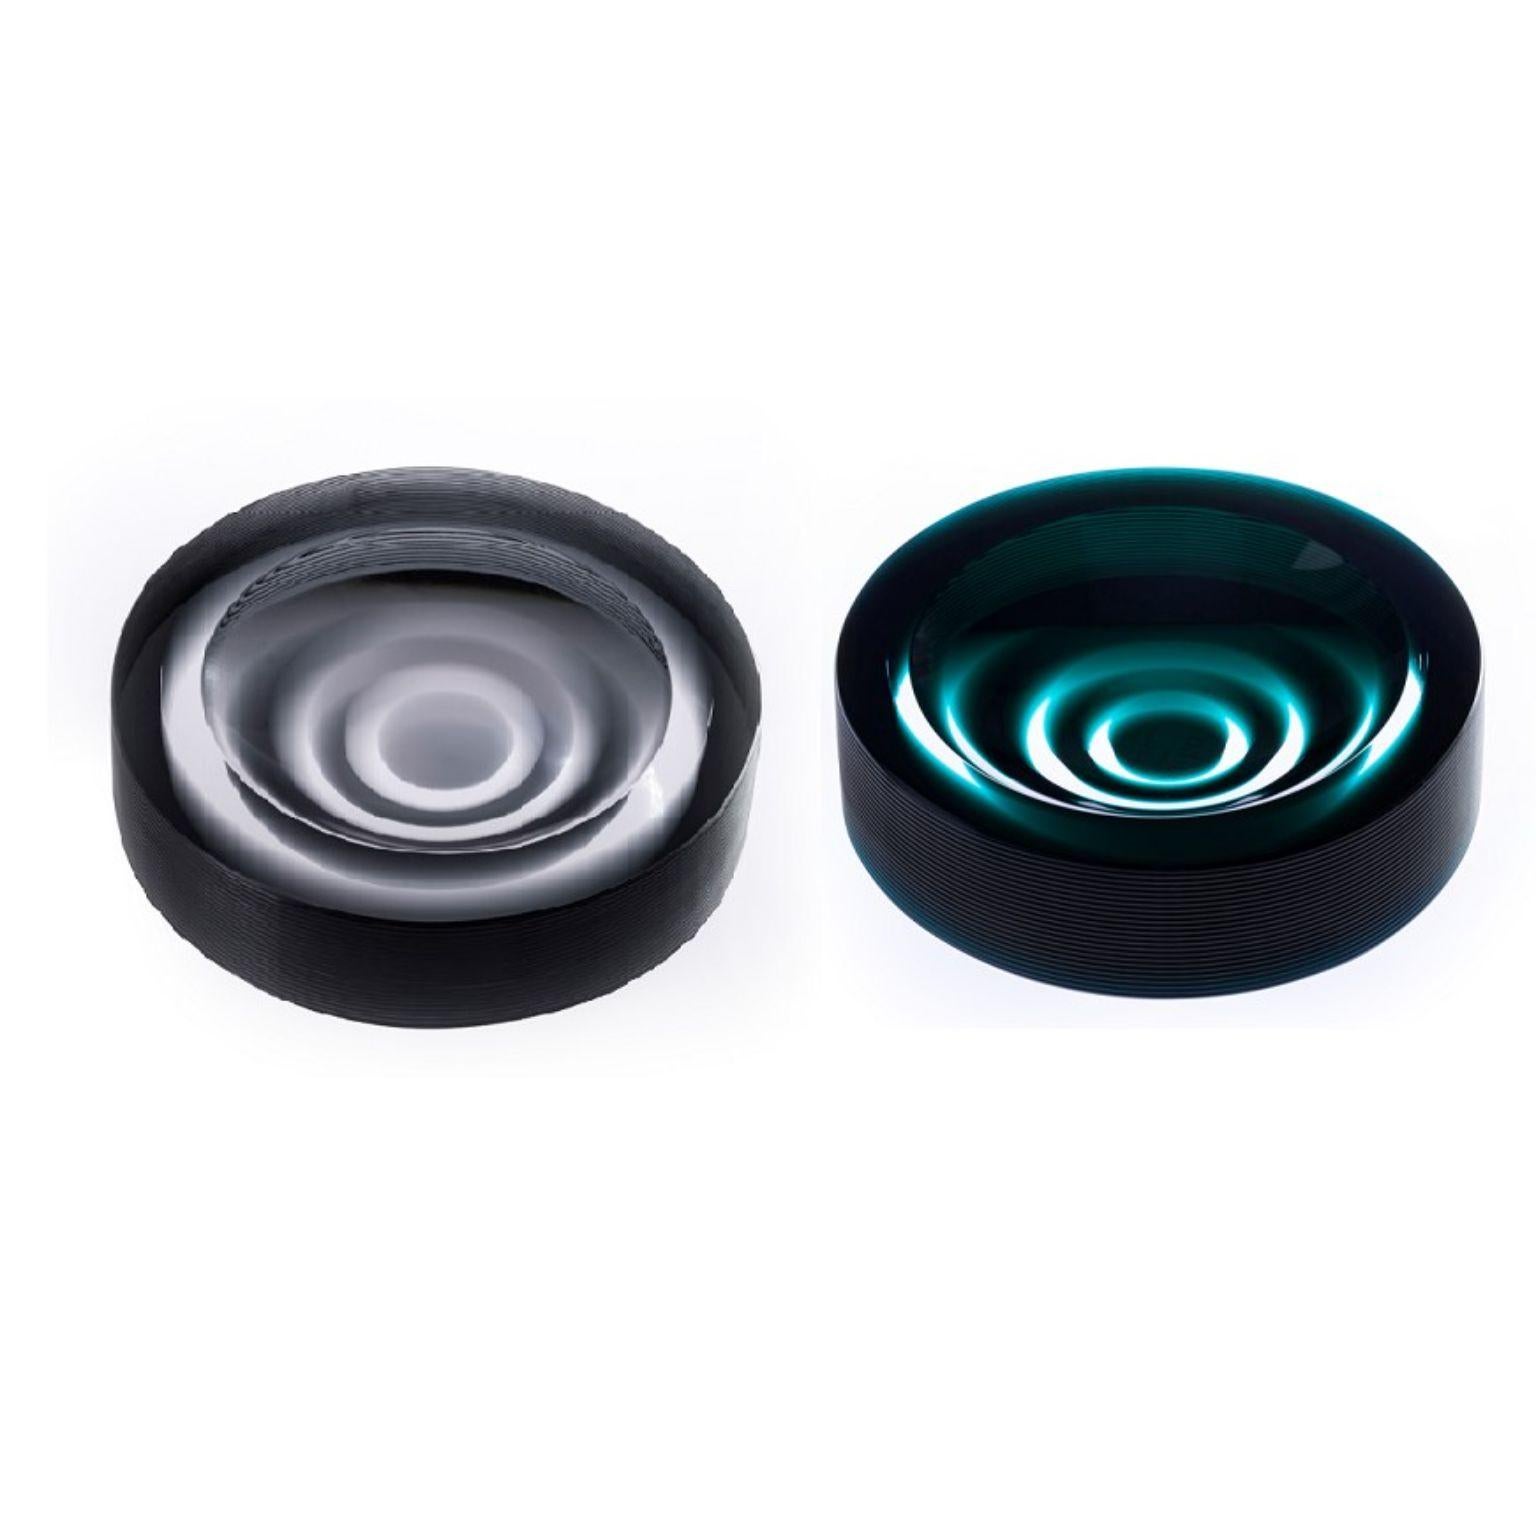 Set of 2 Incisioni Iridi Stripe Ashtrays by Purho
Dimensions: D14x H3.5 cm
Materials: Glass
Other colours and dimensions are available.

Purho is a new protagonist of made in Italy design, a work of synthesis, a research that has lasted for